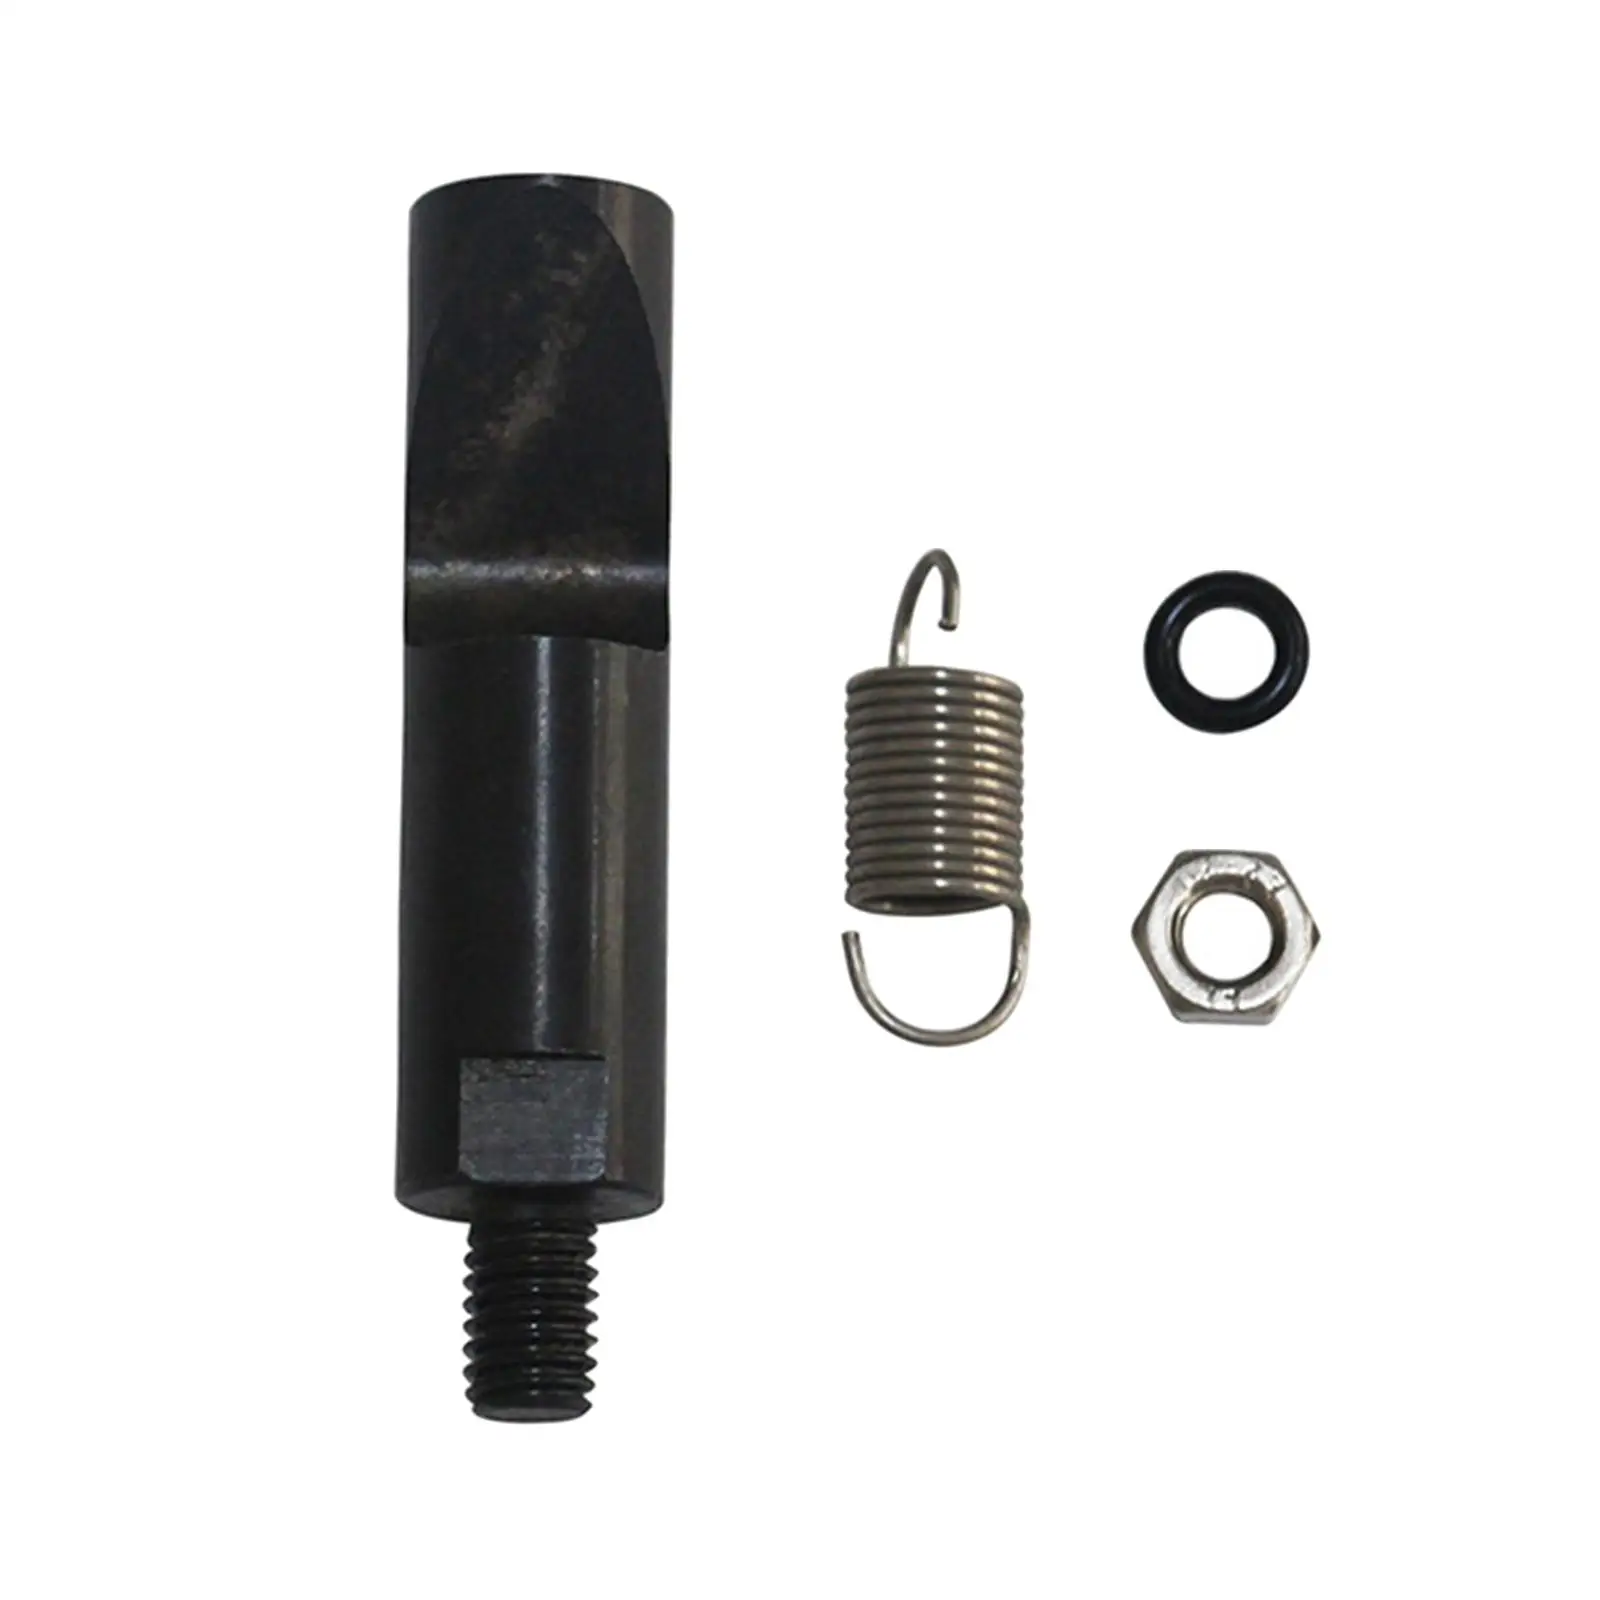 Fuel Pin Kit Easy to Install Aluminum Alloy Reliable 1040178 Assembly for Dodge 5.9L 1988 to 1993 Cummins Spare Parts Premium